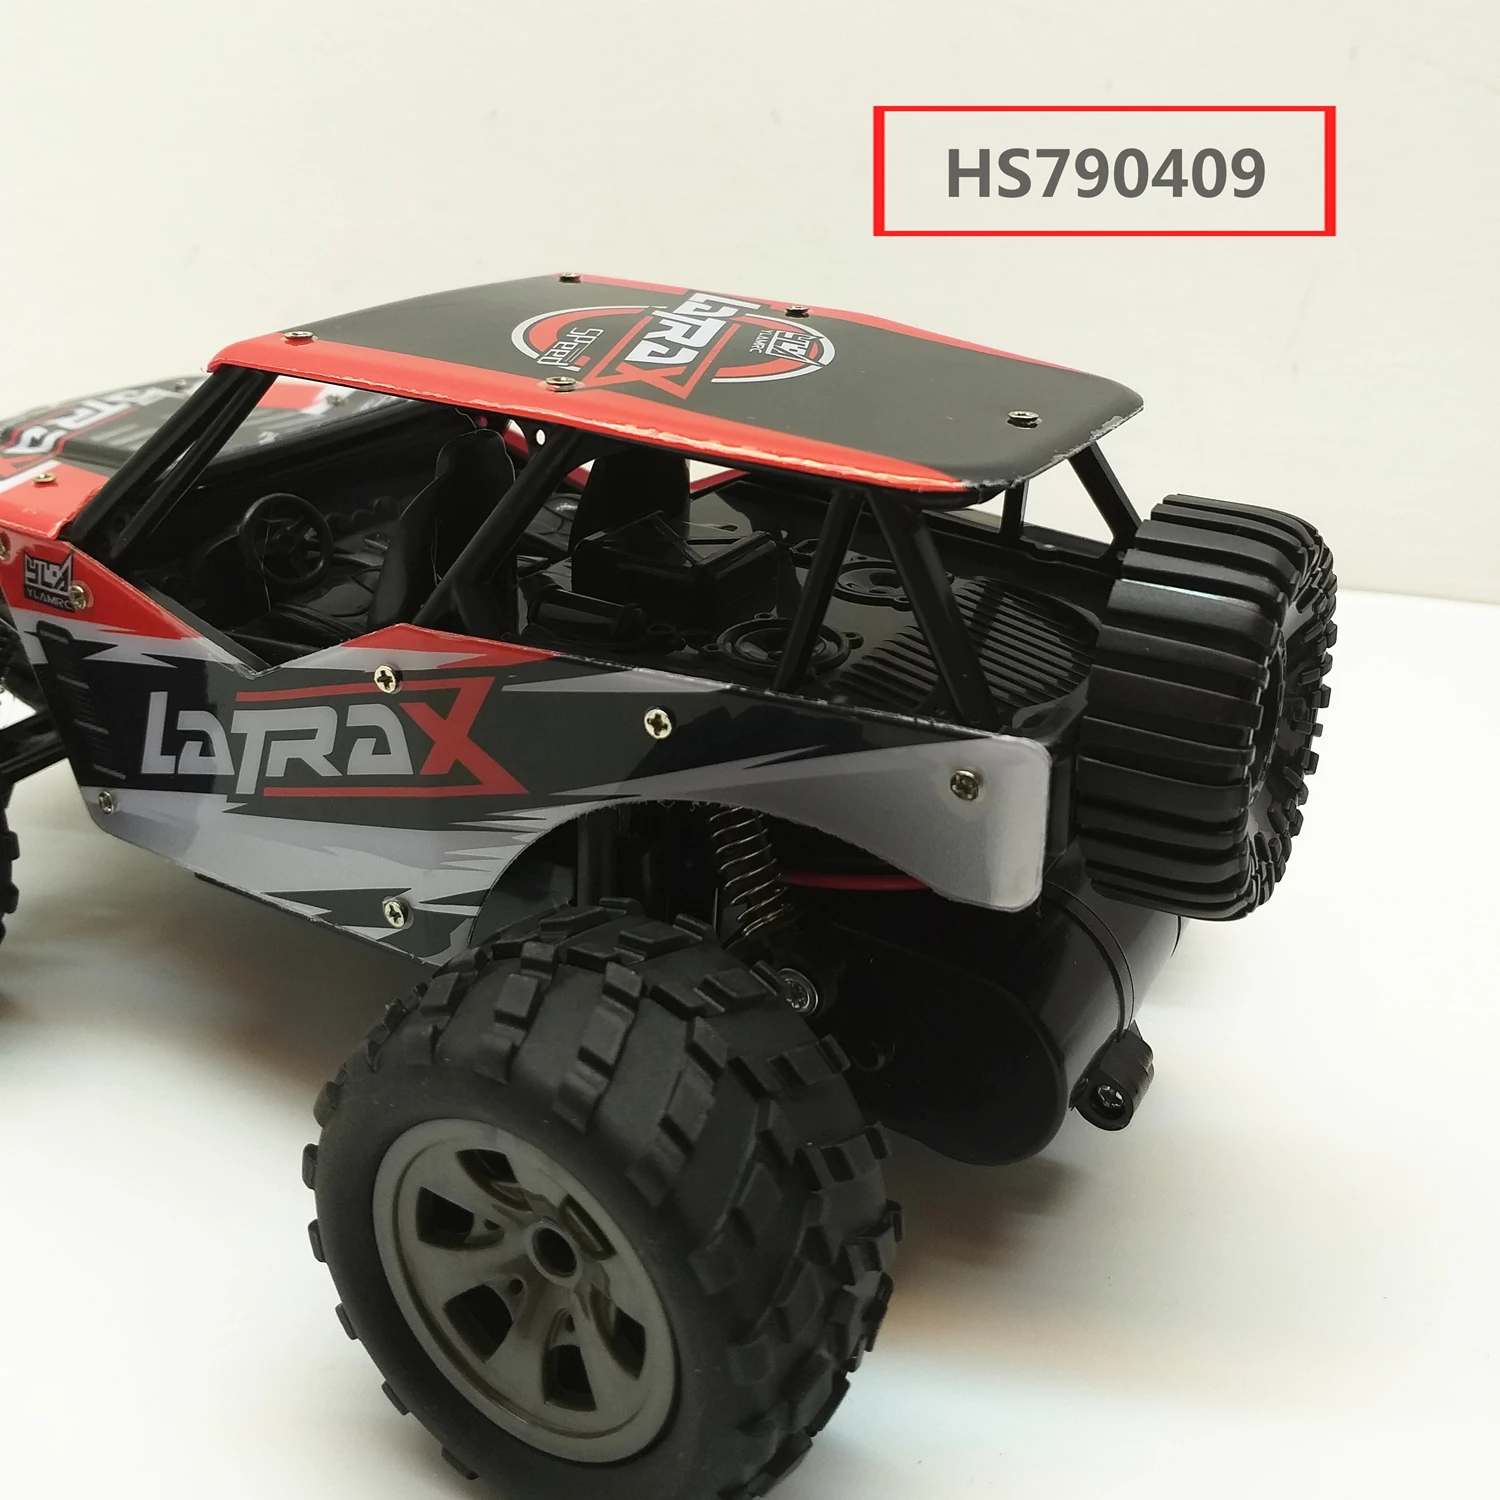 HS790409, Huwsin Toys, 1:18 2.4G RC Car,red/blue/green 3color mixed, Crawlers Off Road Vehicle Toy Remote Control Car